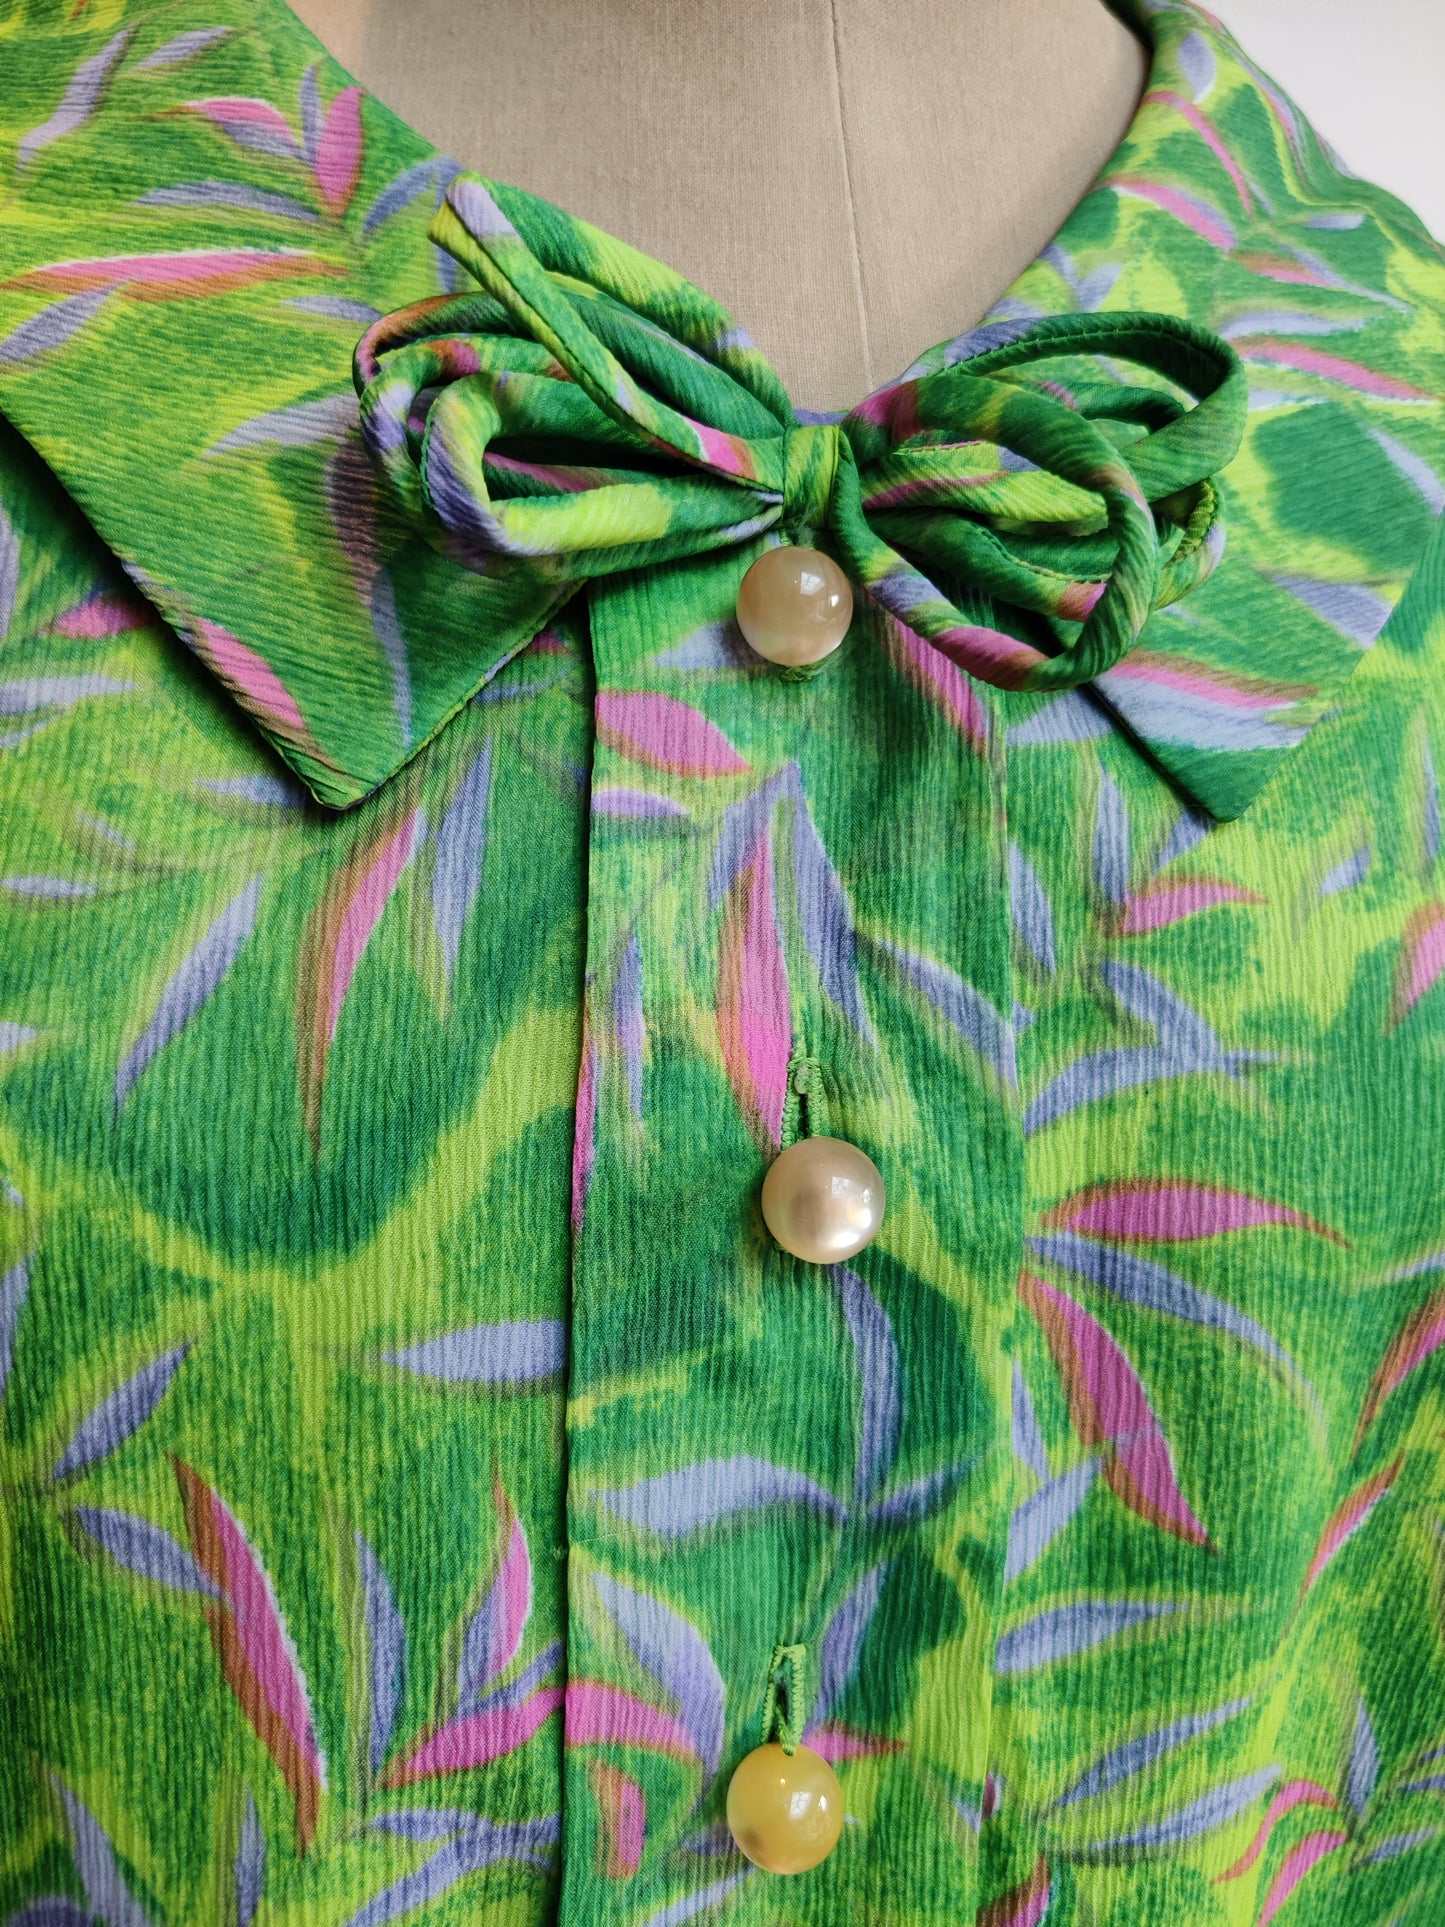 Beautiful vintage glass buttons on 60's dress